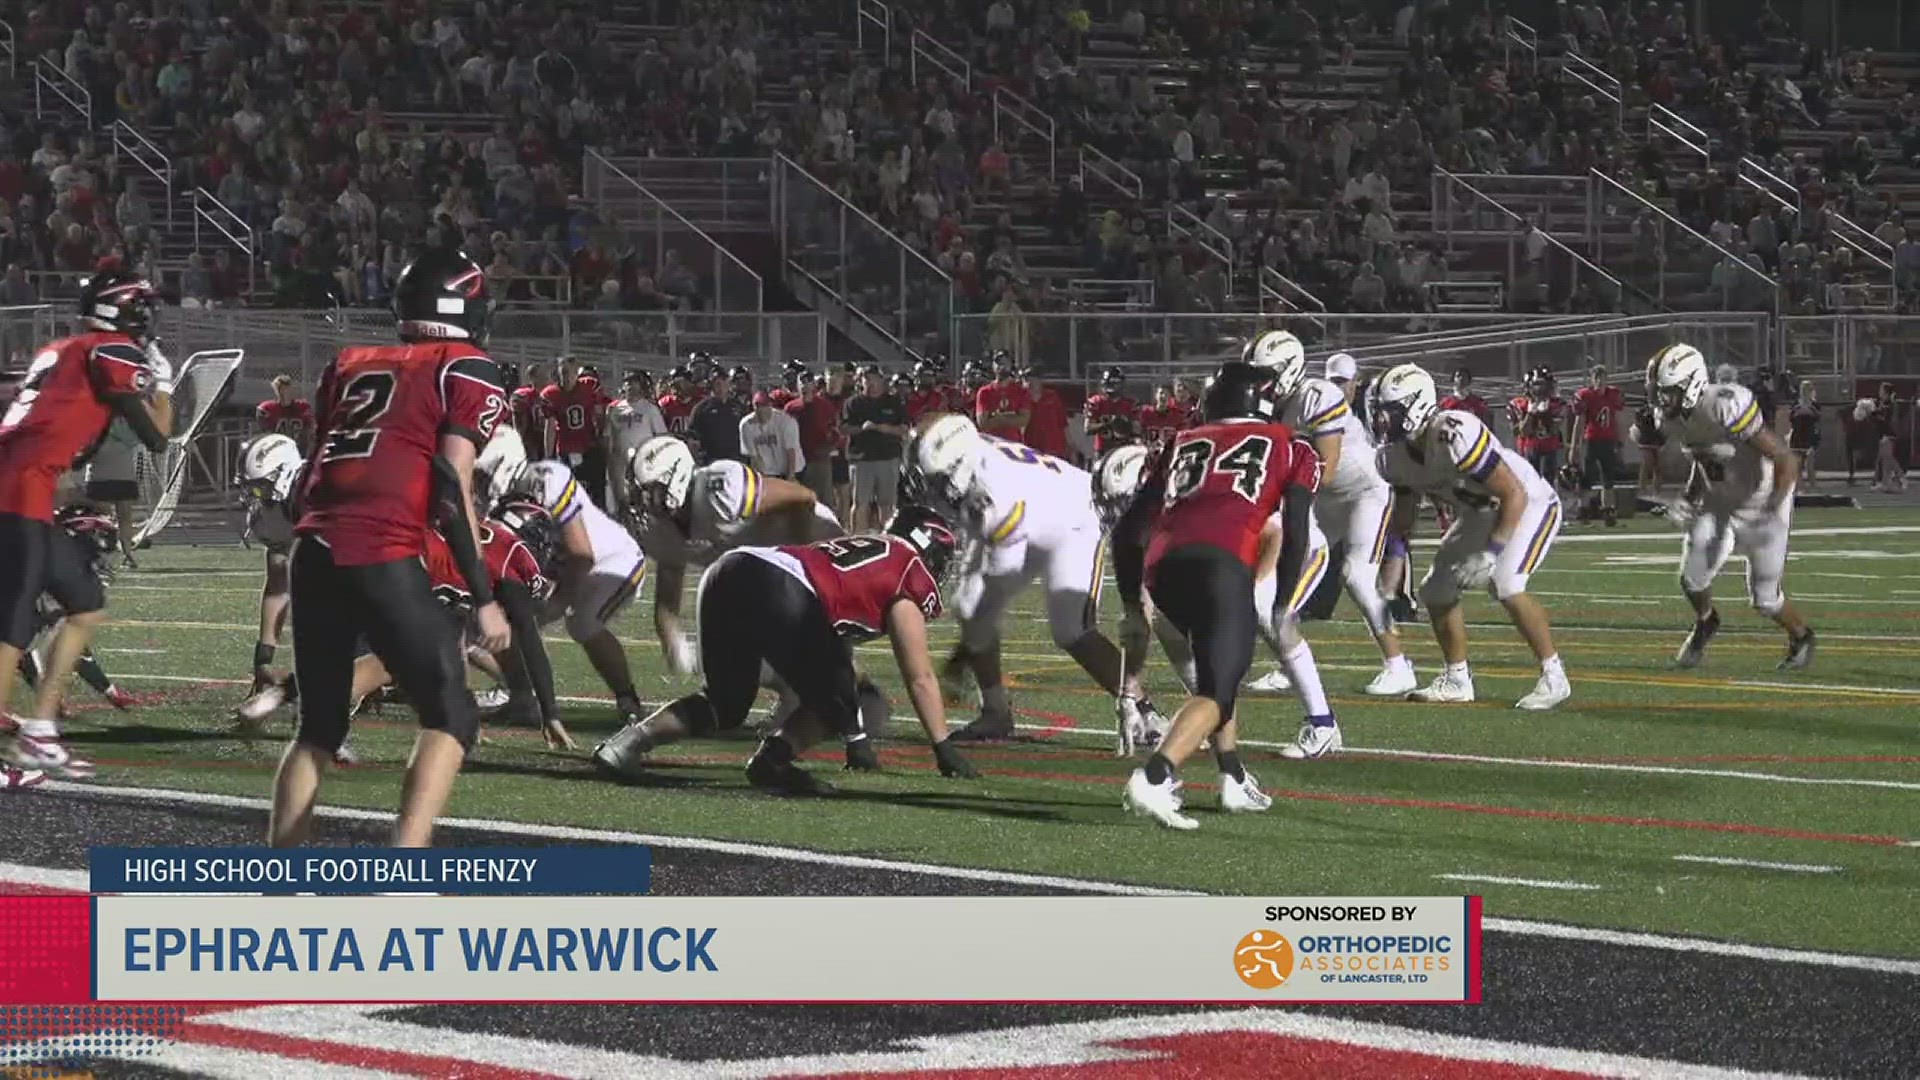 Here's a look at the scores and highlights from across Central Pennsylvania's high school football action in Week 2.